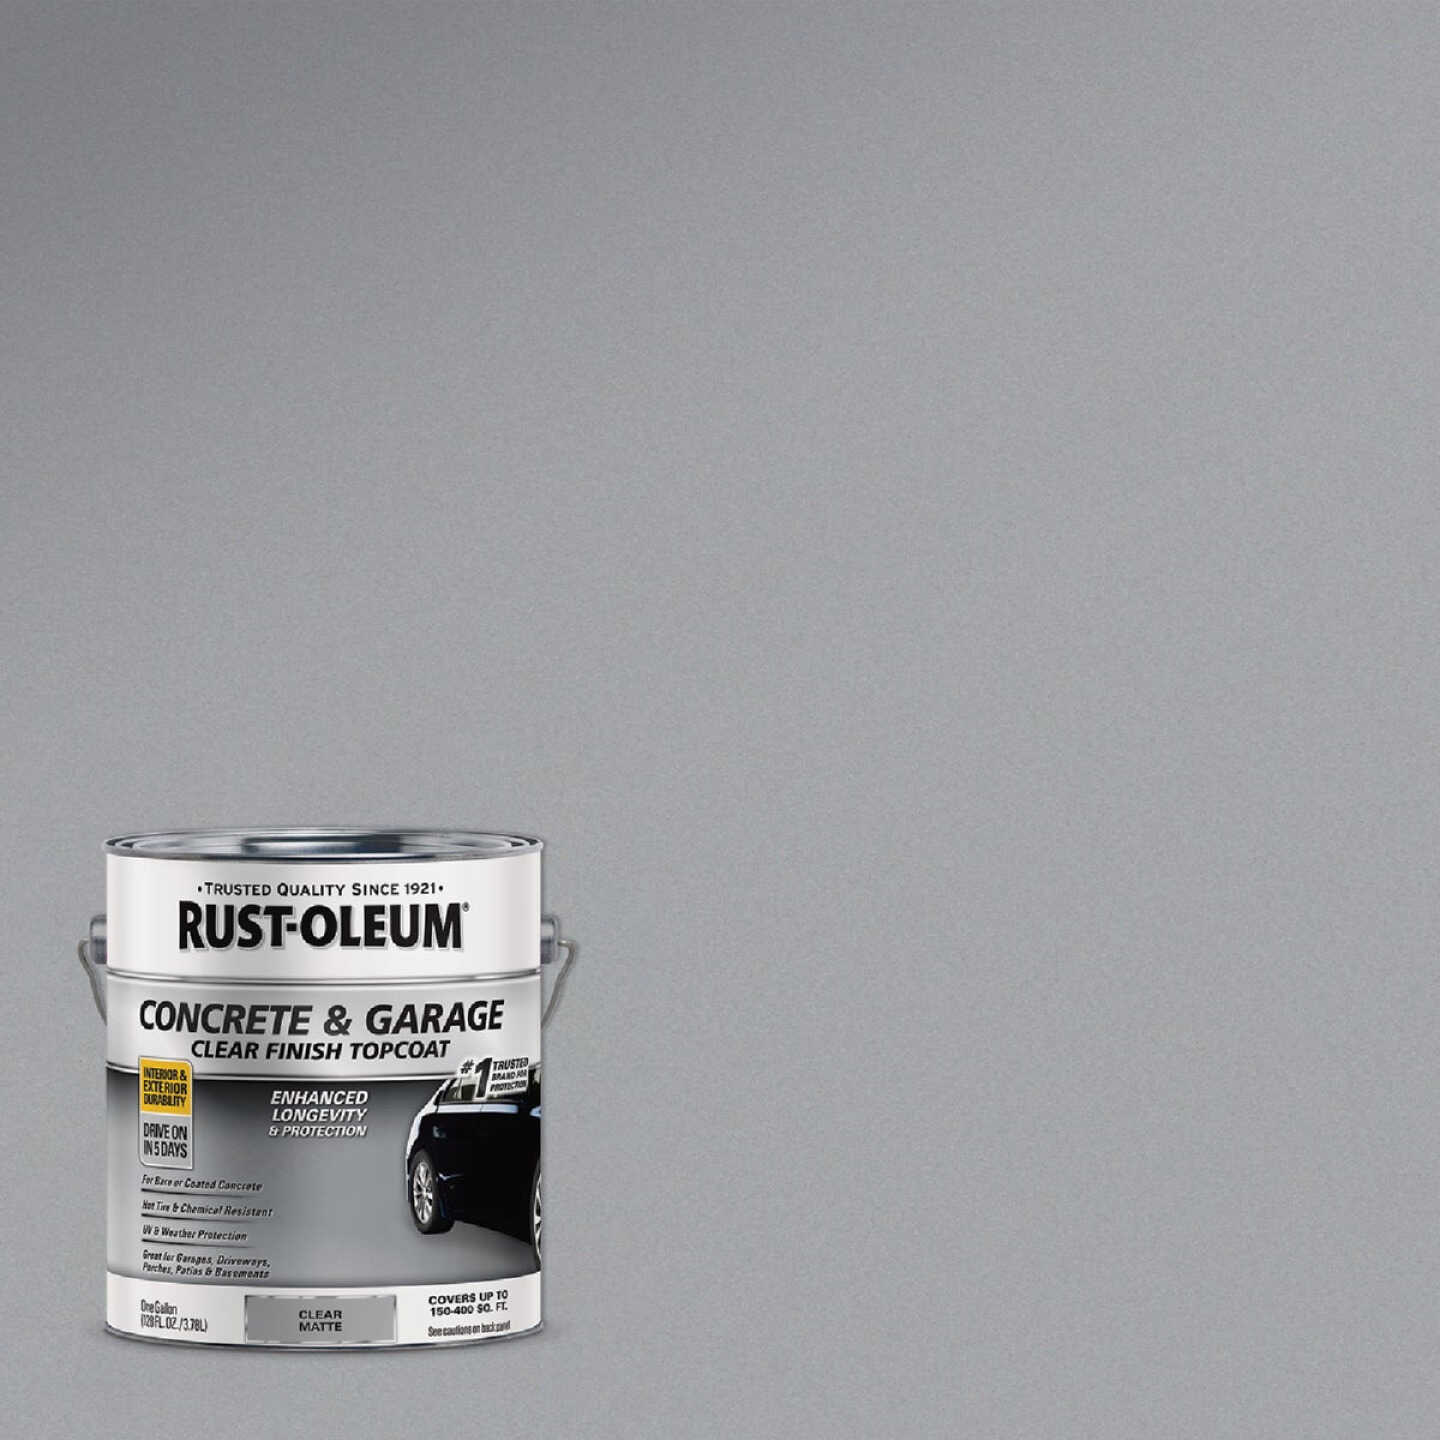 Rust-Oleum 1 Gal. Concrete and Garage Matte Clear Finish Floor Topcoat -  Power Townsend Company